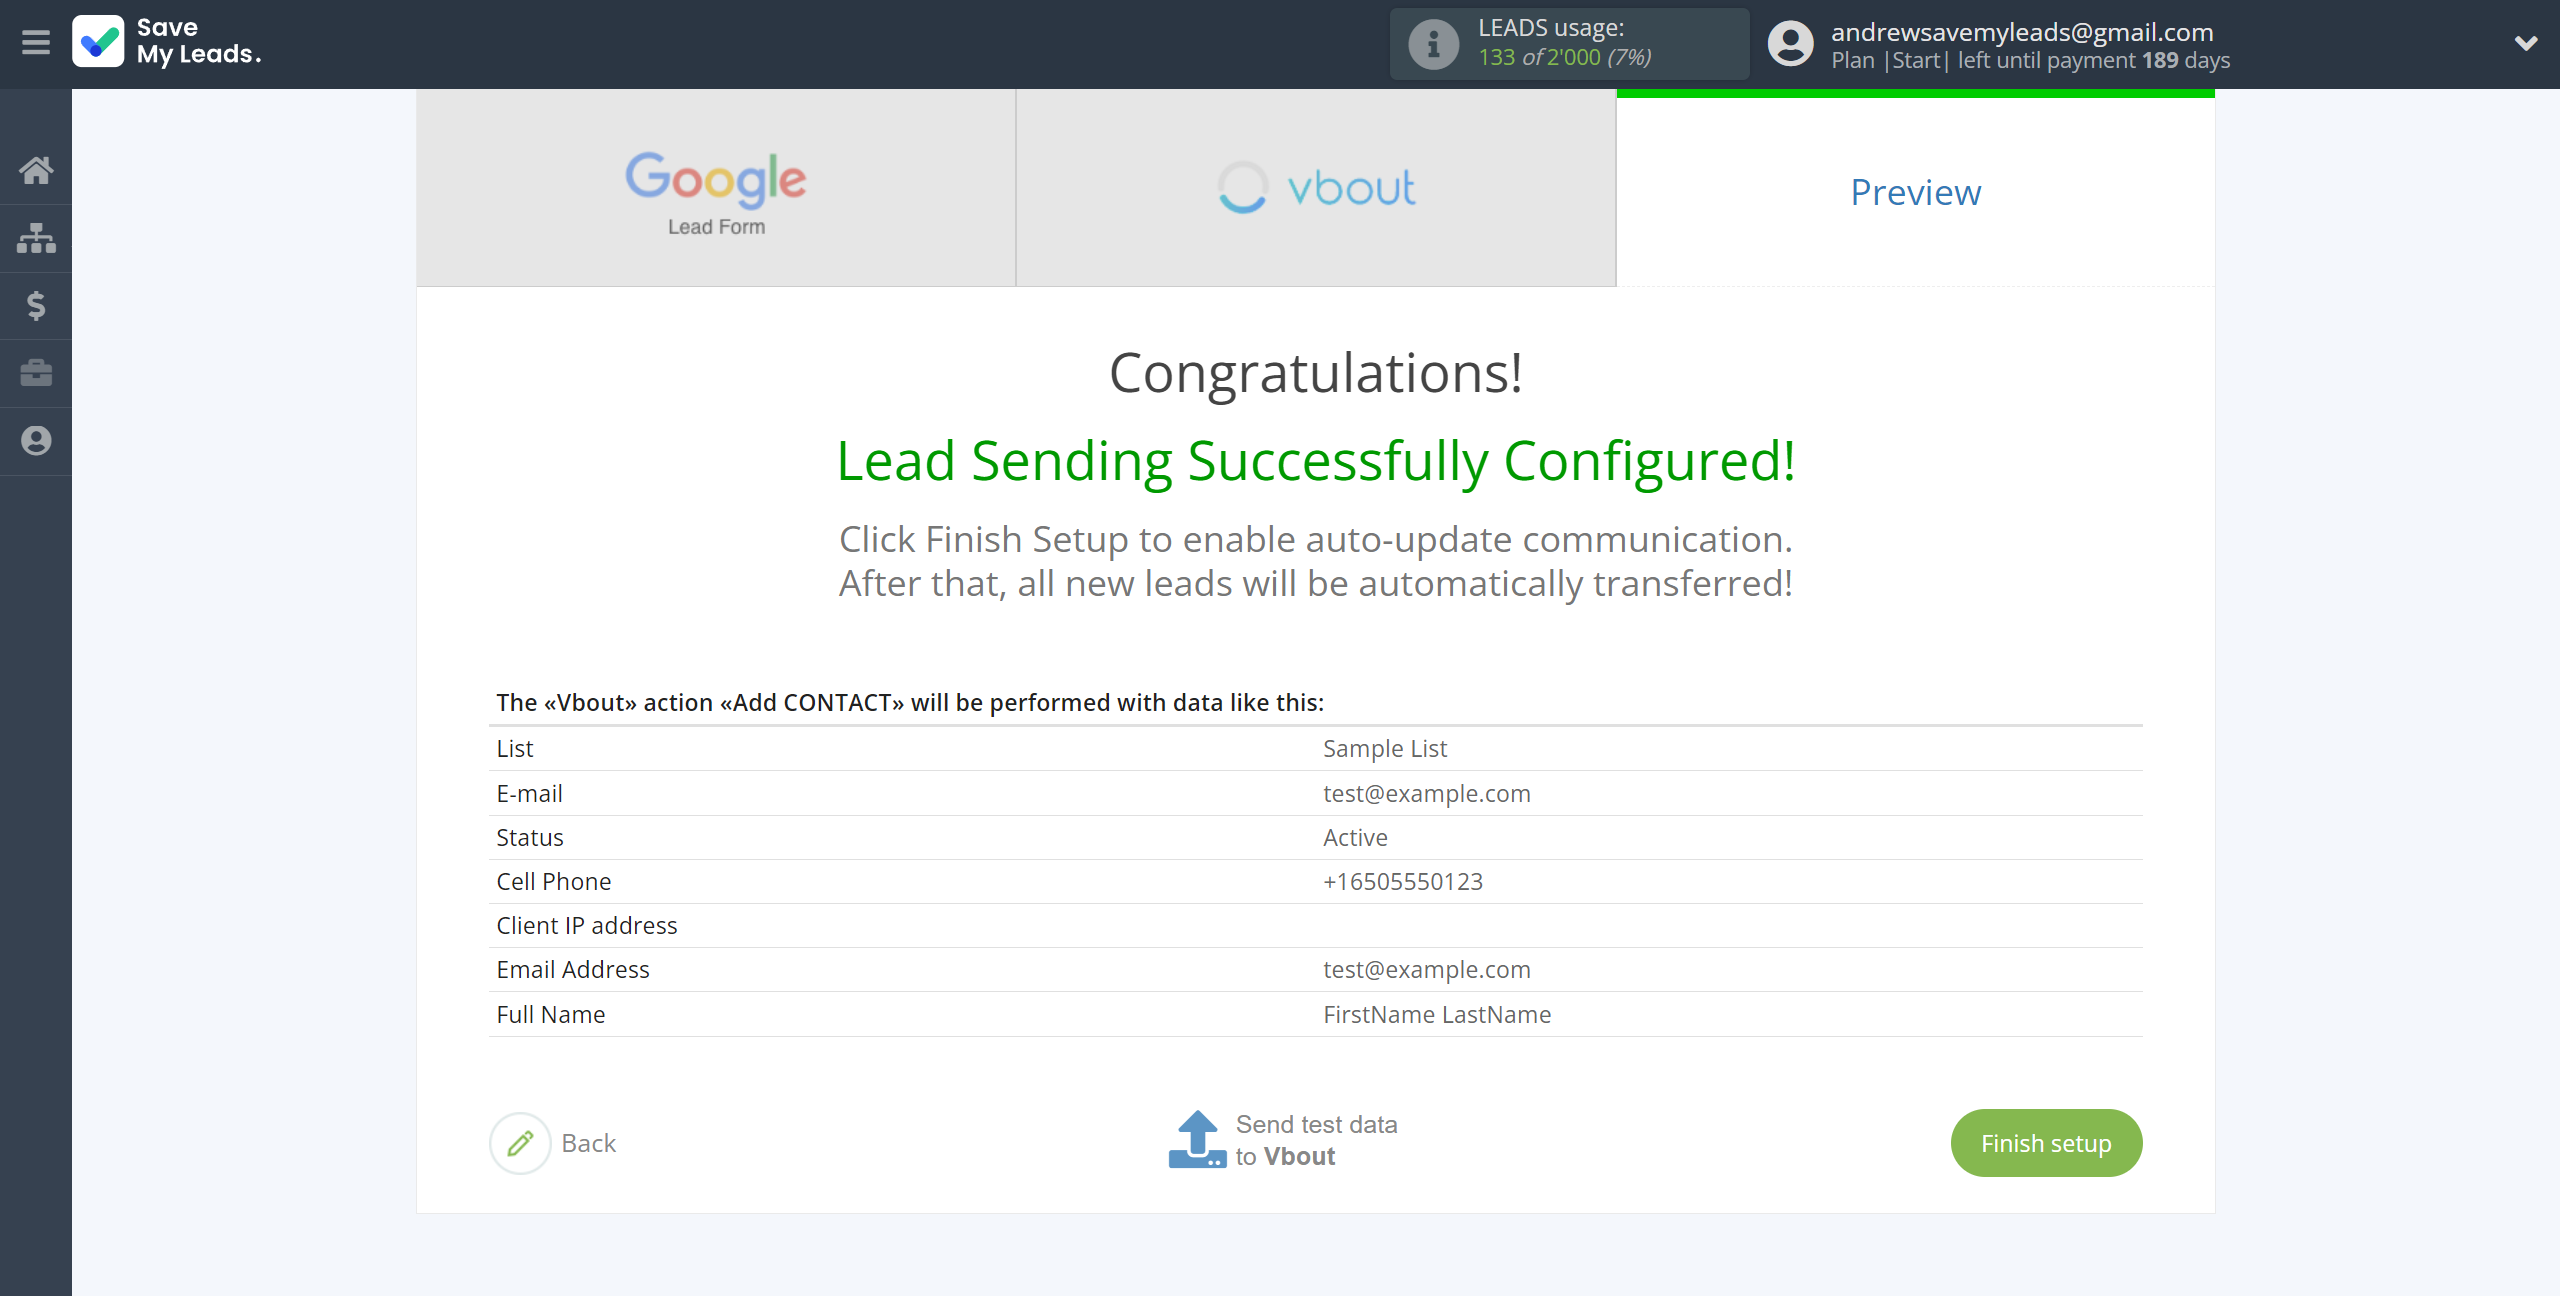 How to Connect Google Lead Form with Vbout Add Contact | Test data